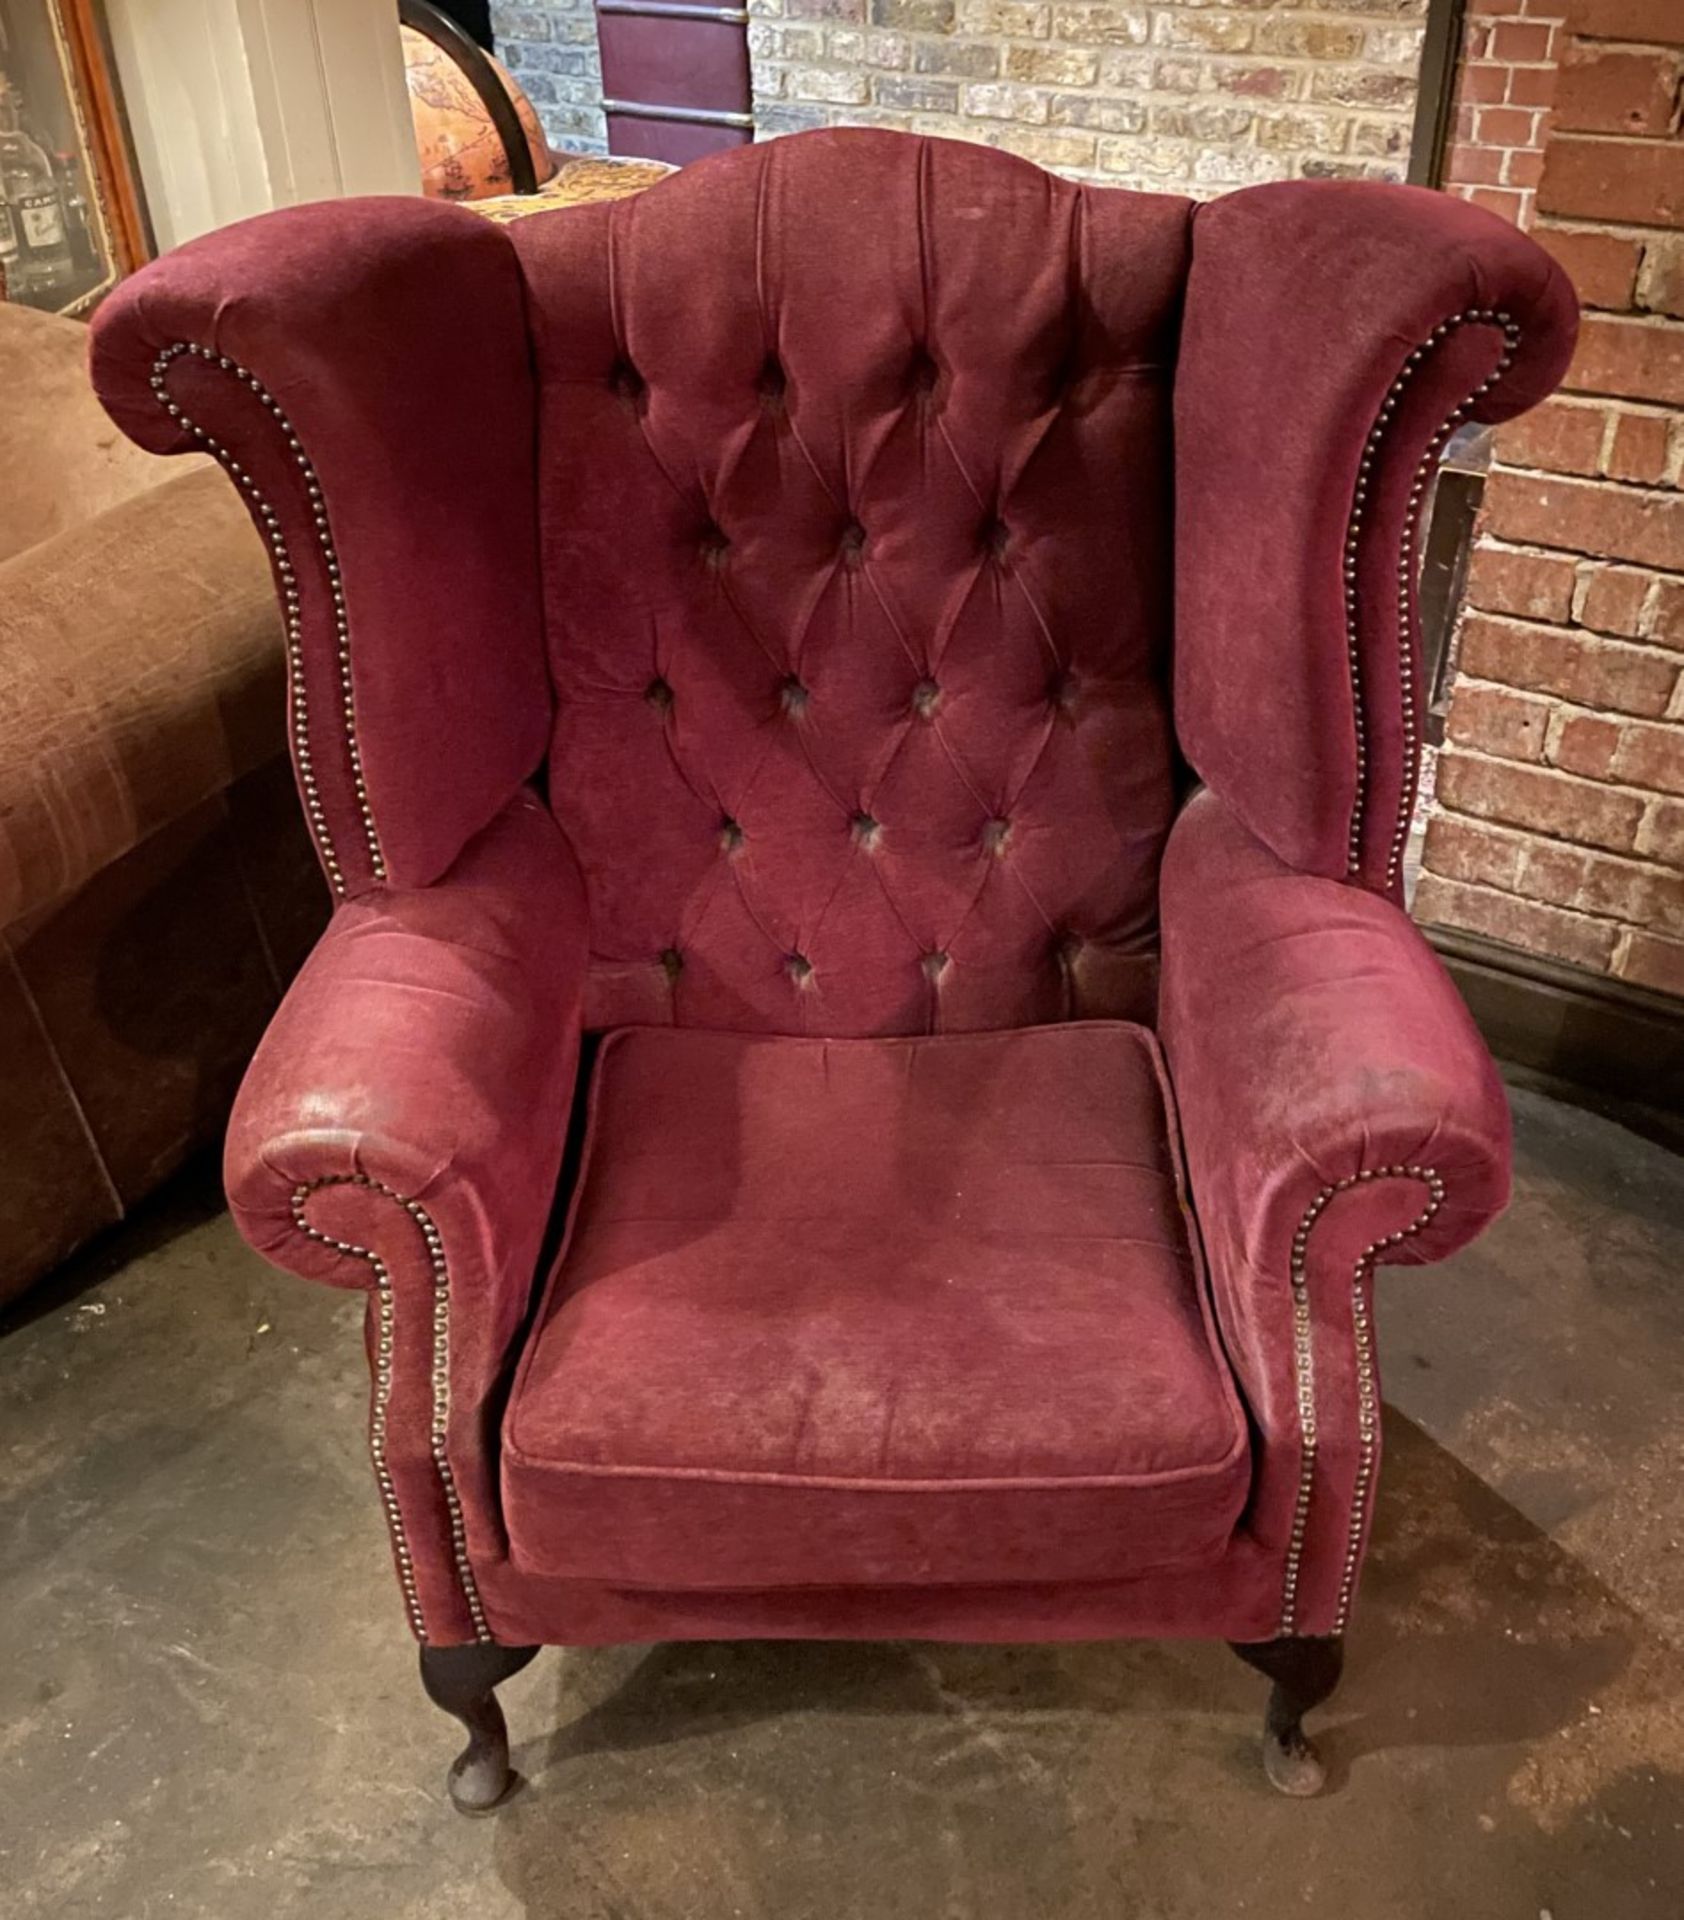 1 x Period-style Distressed Chesterfield Queen Anne High Button-Tufted Wing Back Armchair in Red